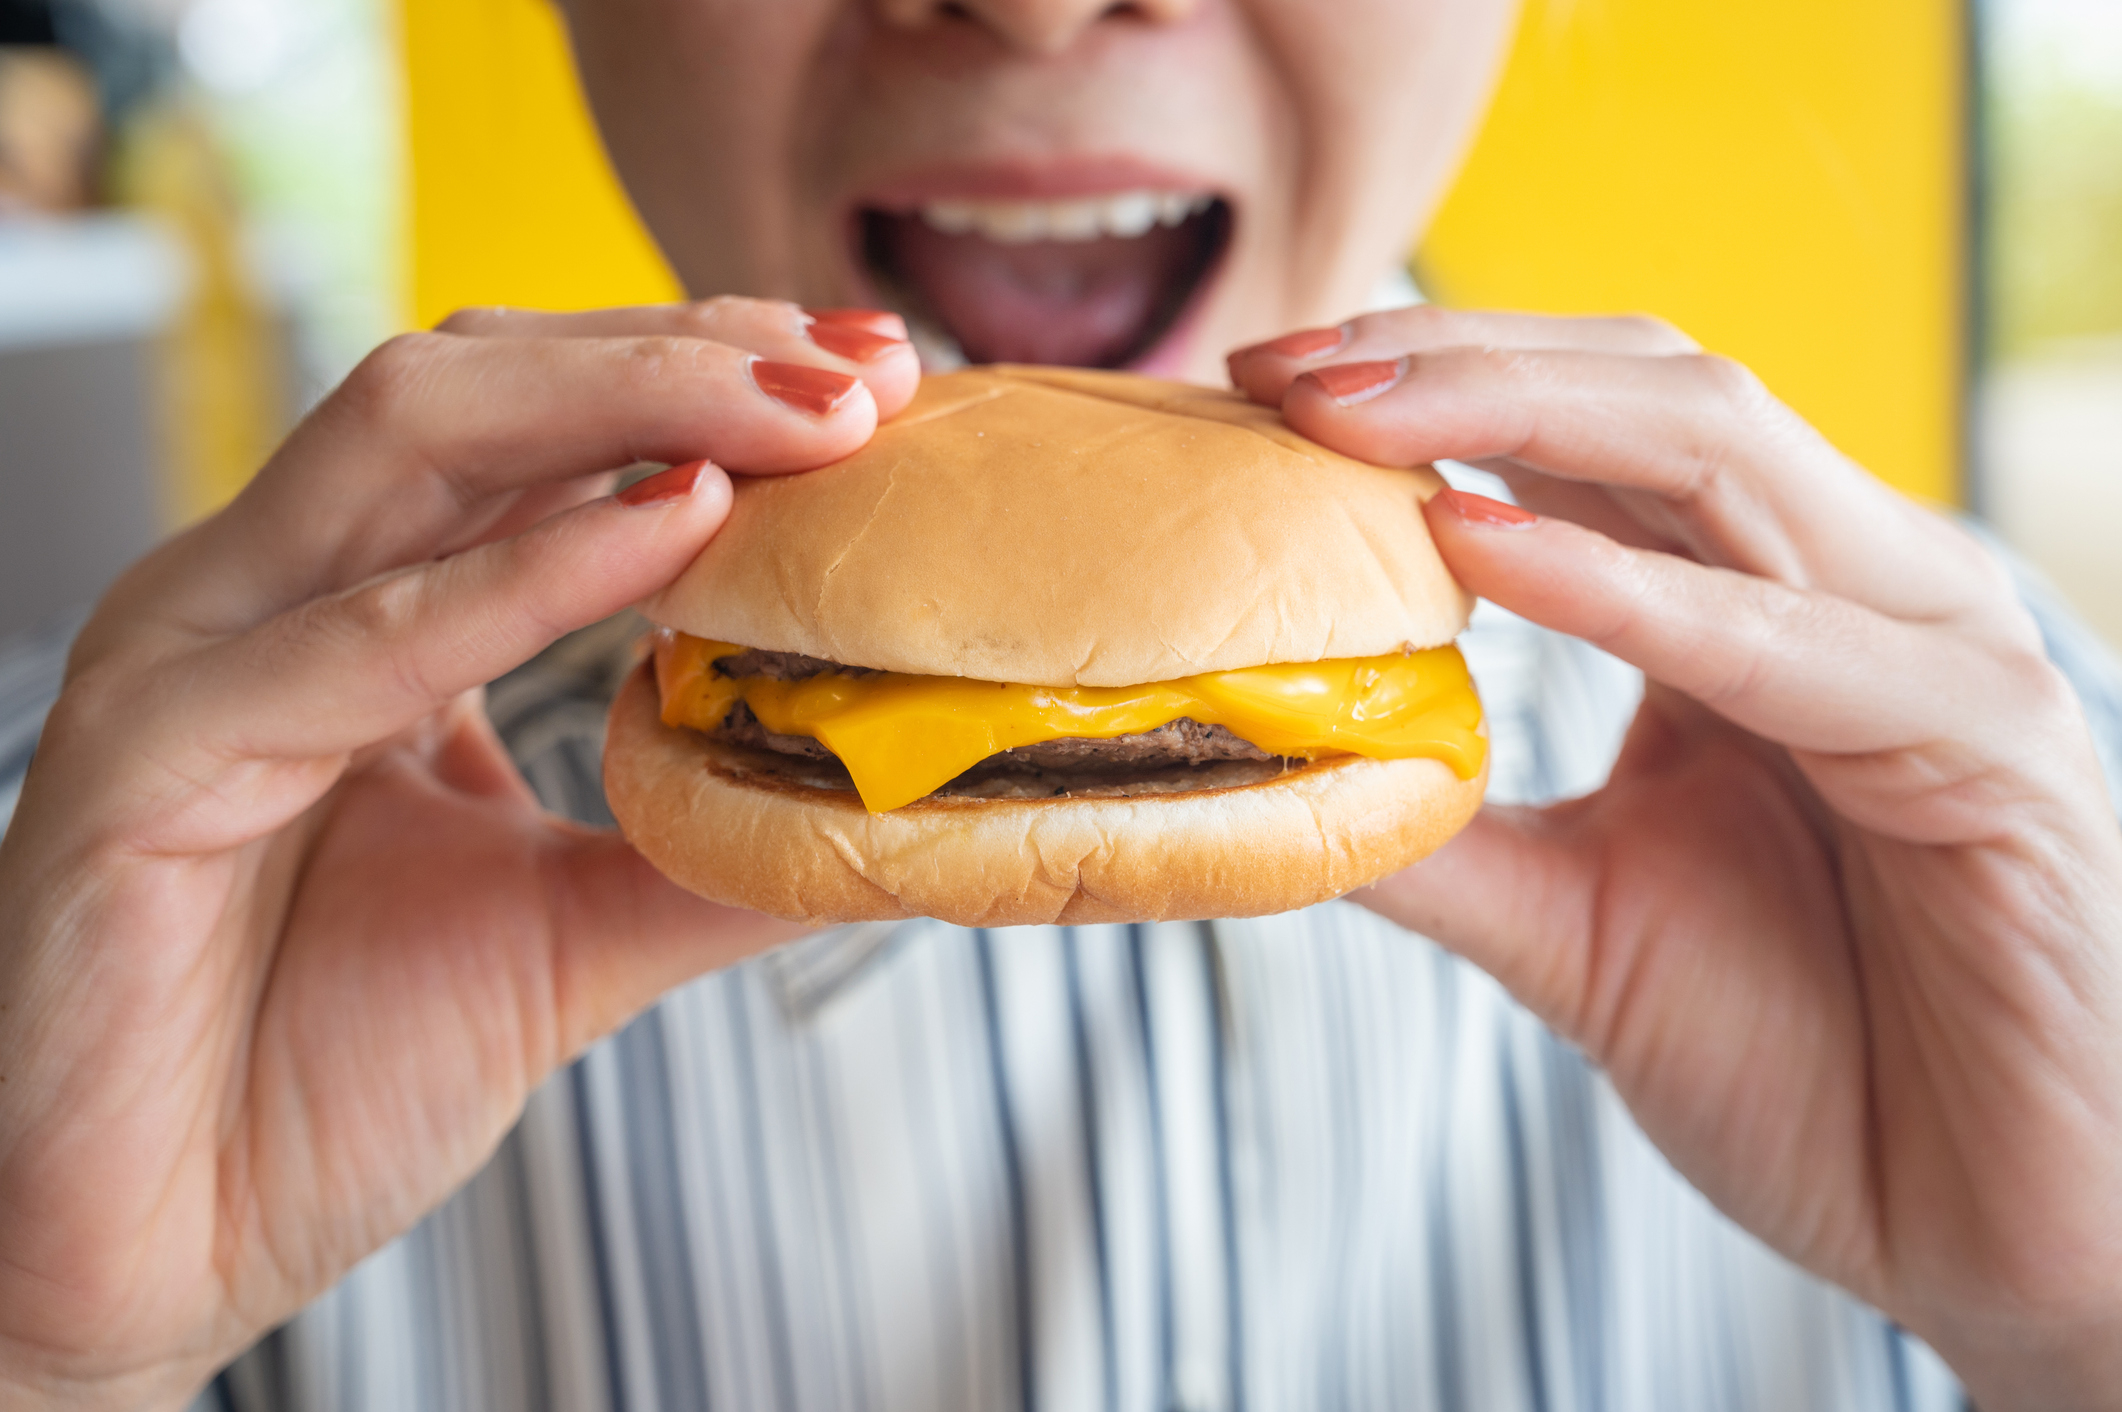 A woman about to bite a burger